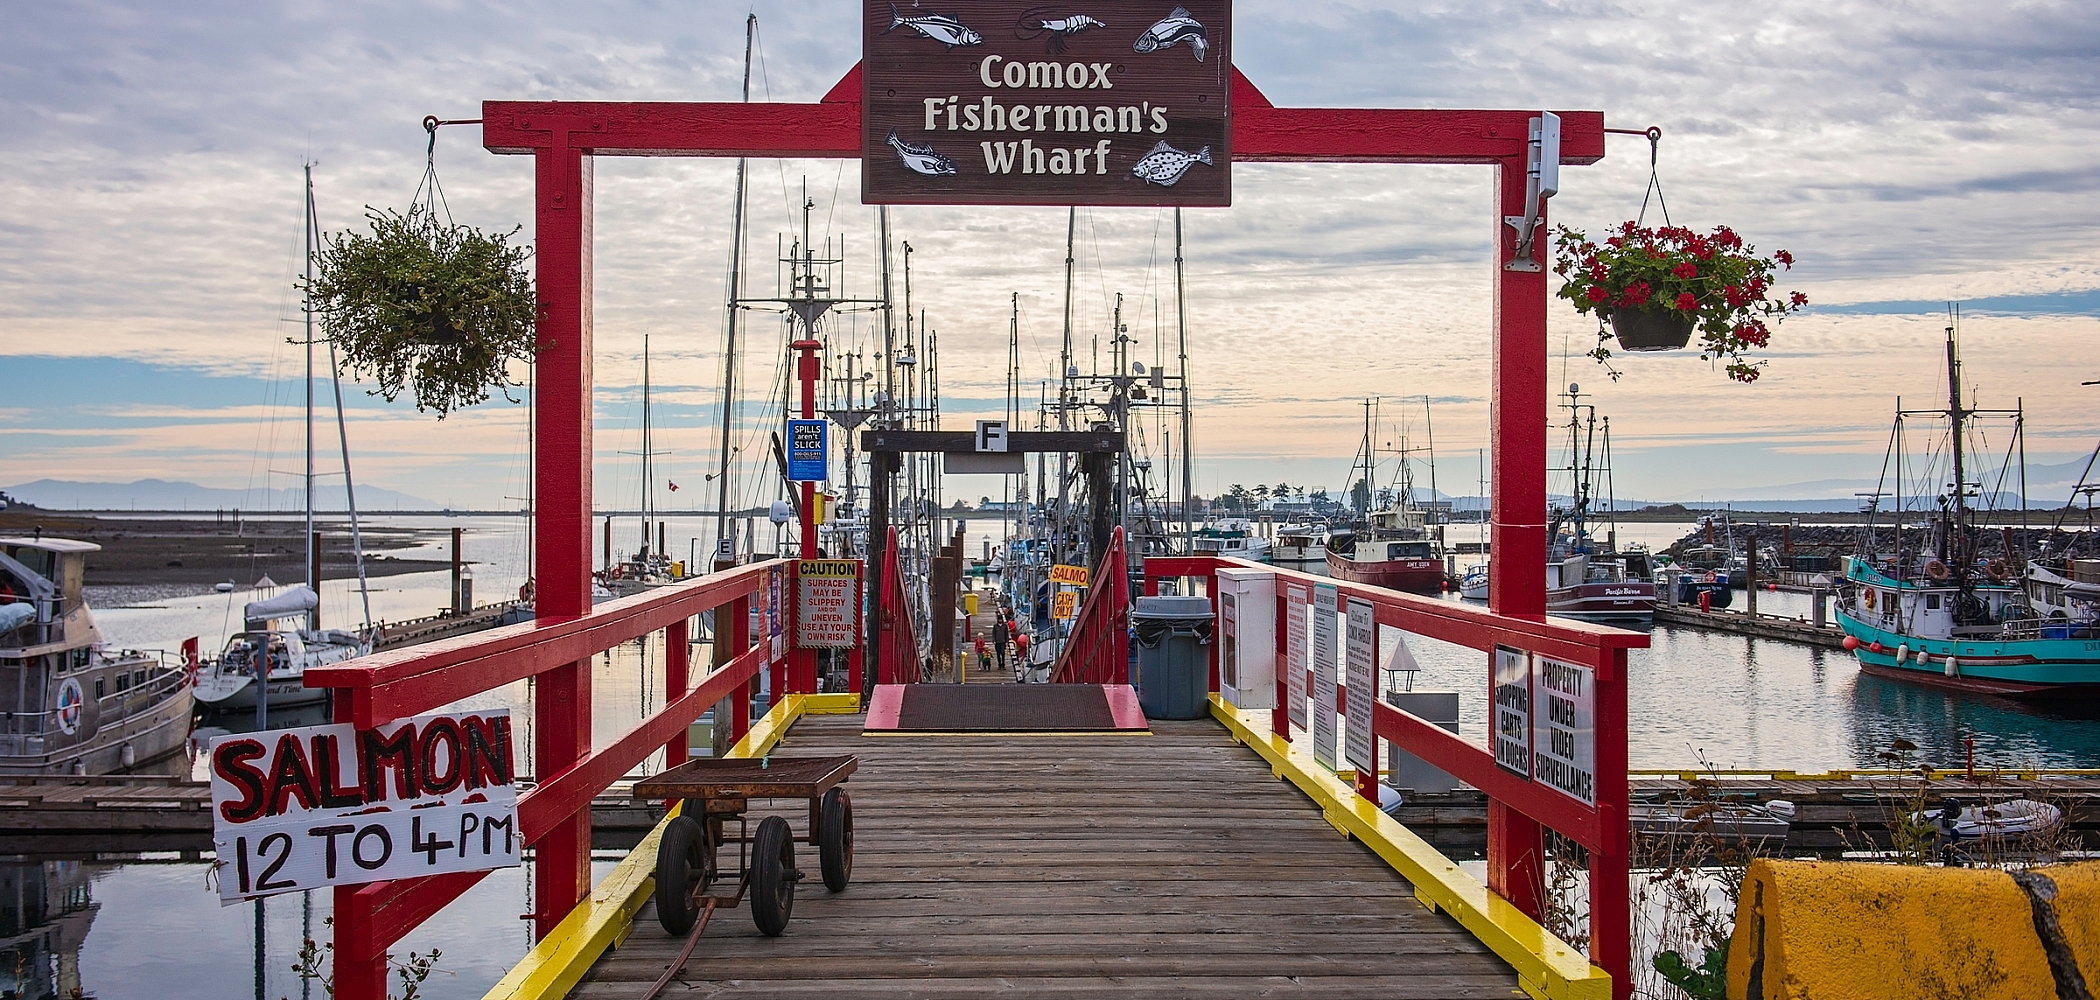 Brightly-coloured red and yellow archway and railing leading out to a dock lined with fishing vessels. A sign reads, "Comox Fisherman's Wharf."